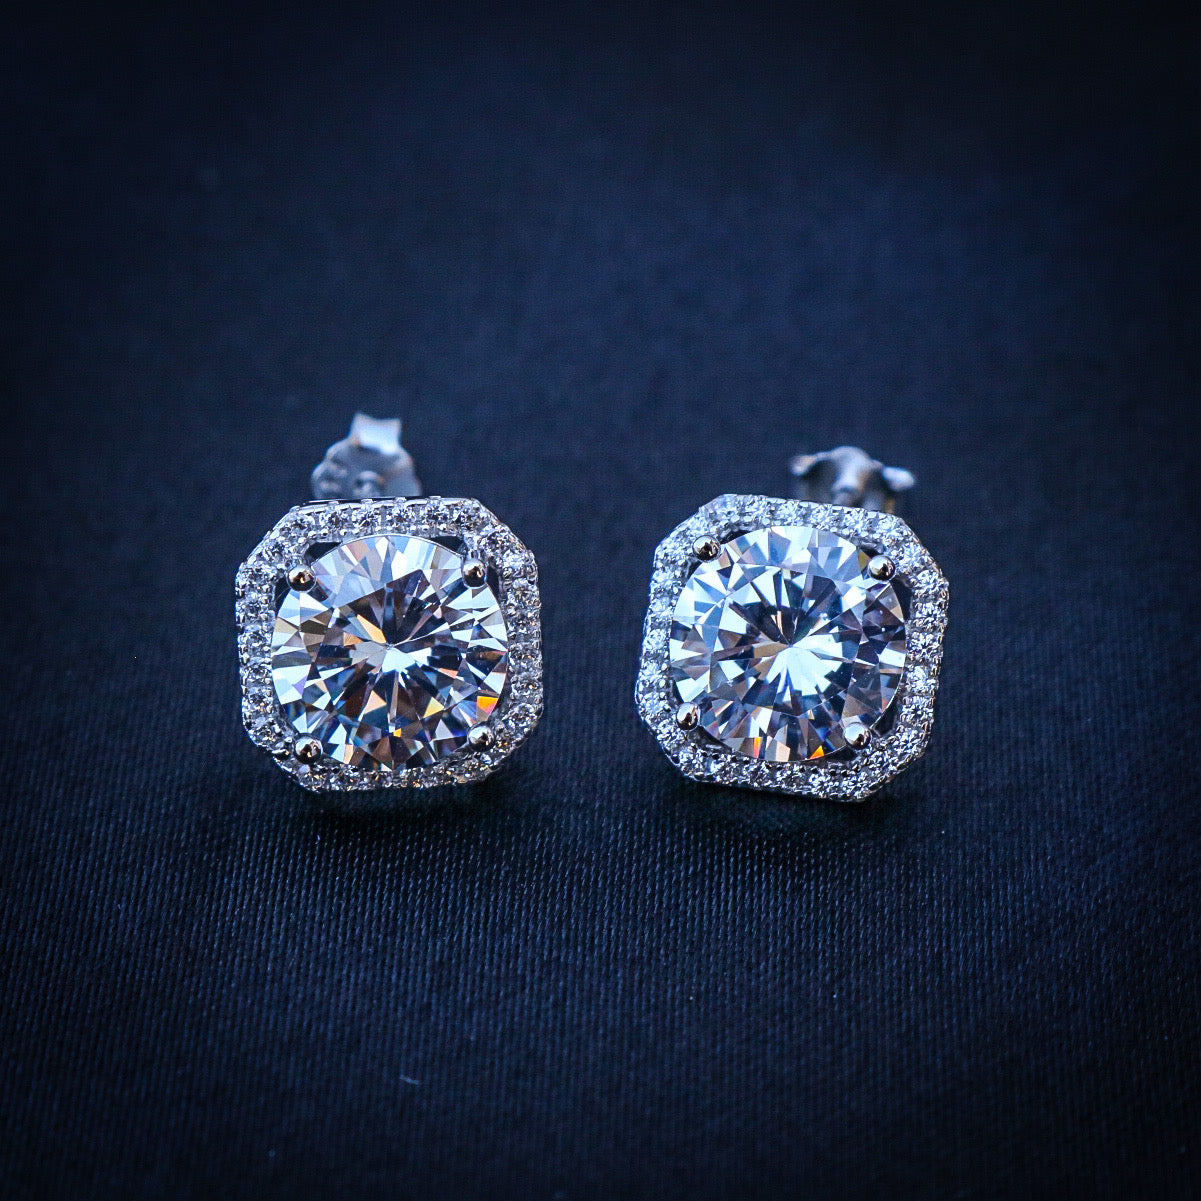 Real 925 Silver - Iced out Diamond Stud Earrings